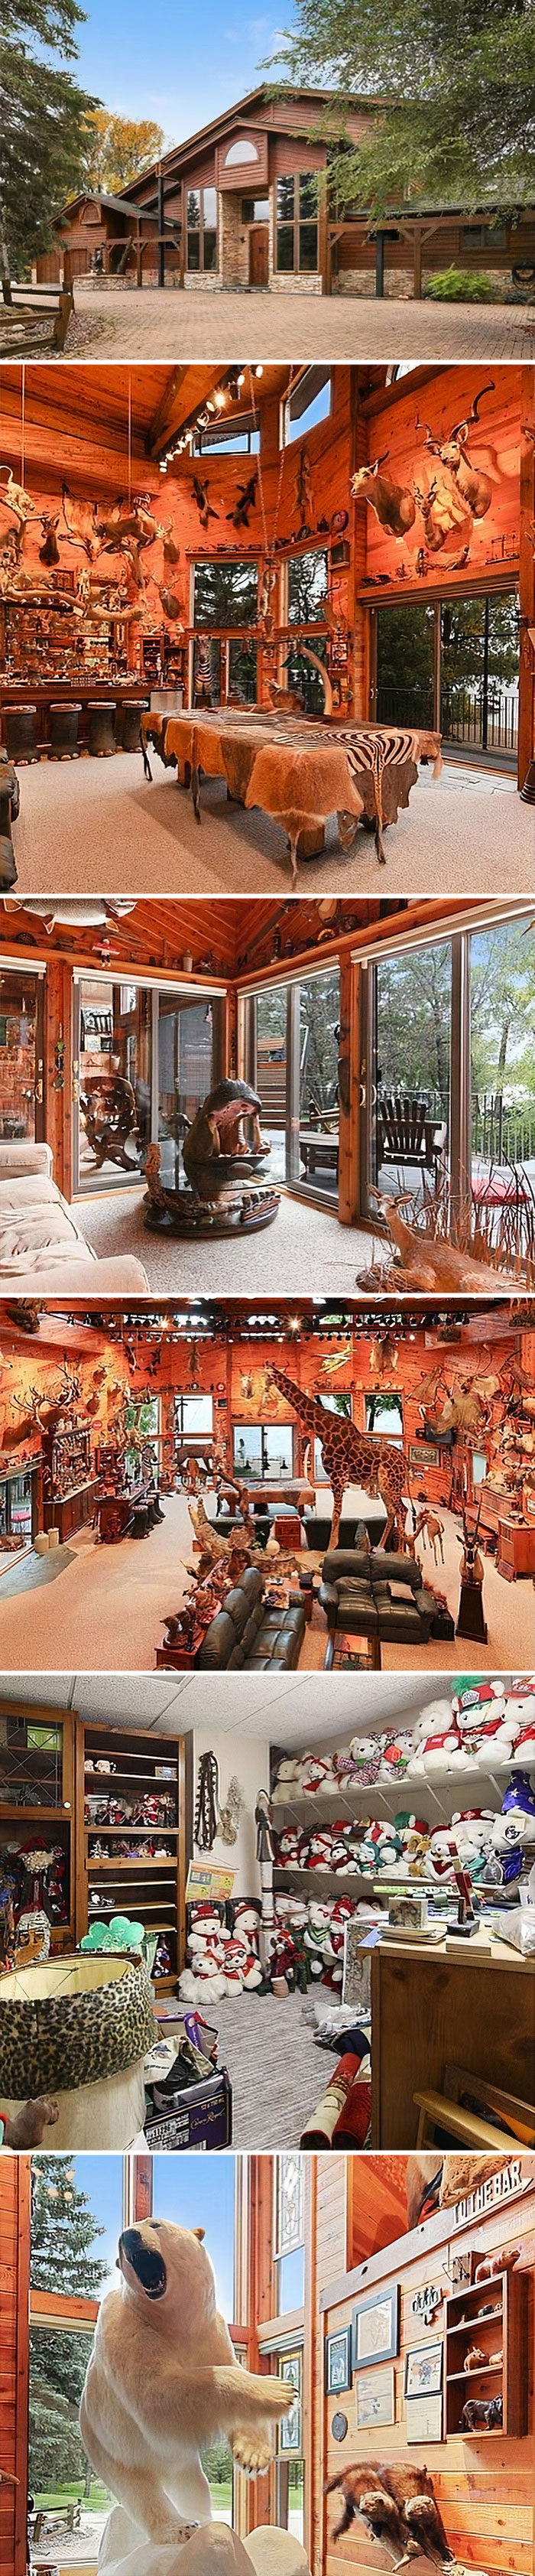 Warning: Lots Of Taxidermy. How Is This Even Possible. $1,299,000